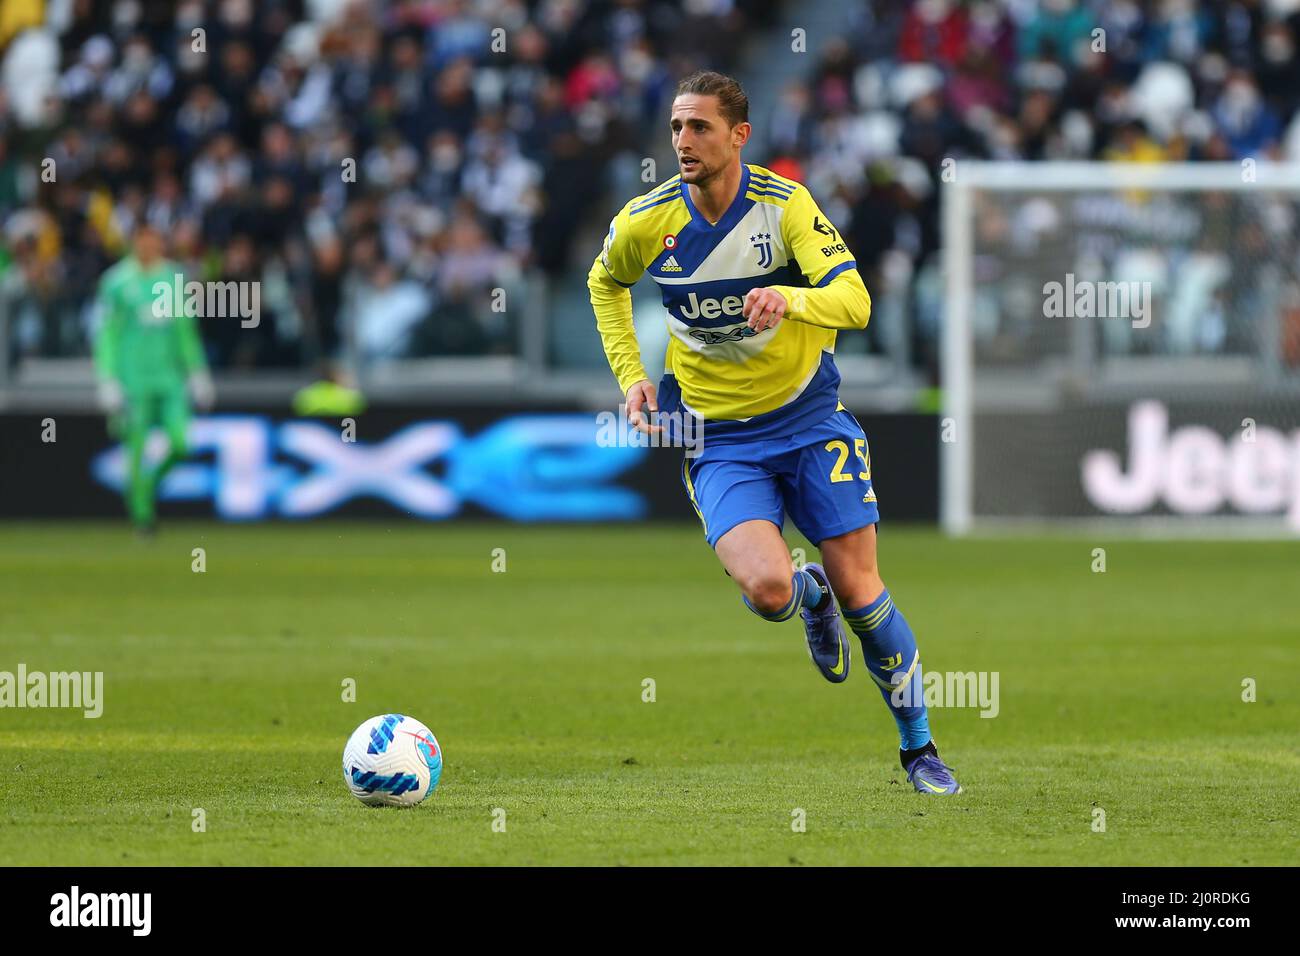 TURIN, ITALY. 20 MARCH 2022. Adrien Rabiot of Juventus FC during the match between Juventus FC and US Salernitana 1919 on March 20, 2022 at Allianz Stadium in Turin, Italy. Credit: Massimiliano Ferraro/Medialys Images/Alamy Live News Stock Photo